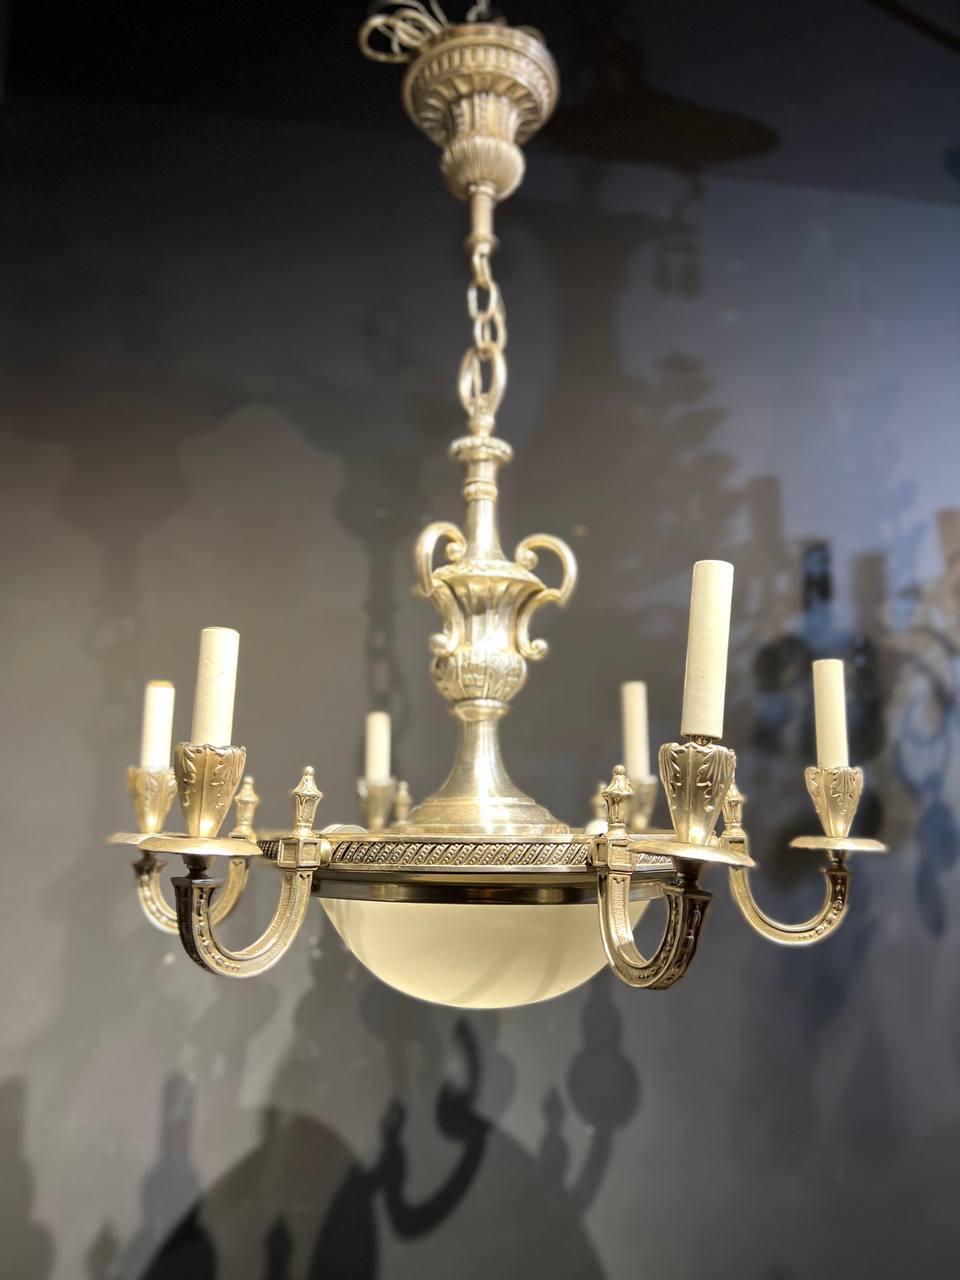 a circa 1920's silver plated light fixture with Opaline glass inset, with 6 lights and 2 interior lights